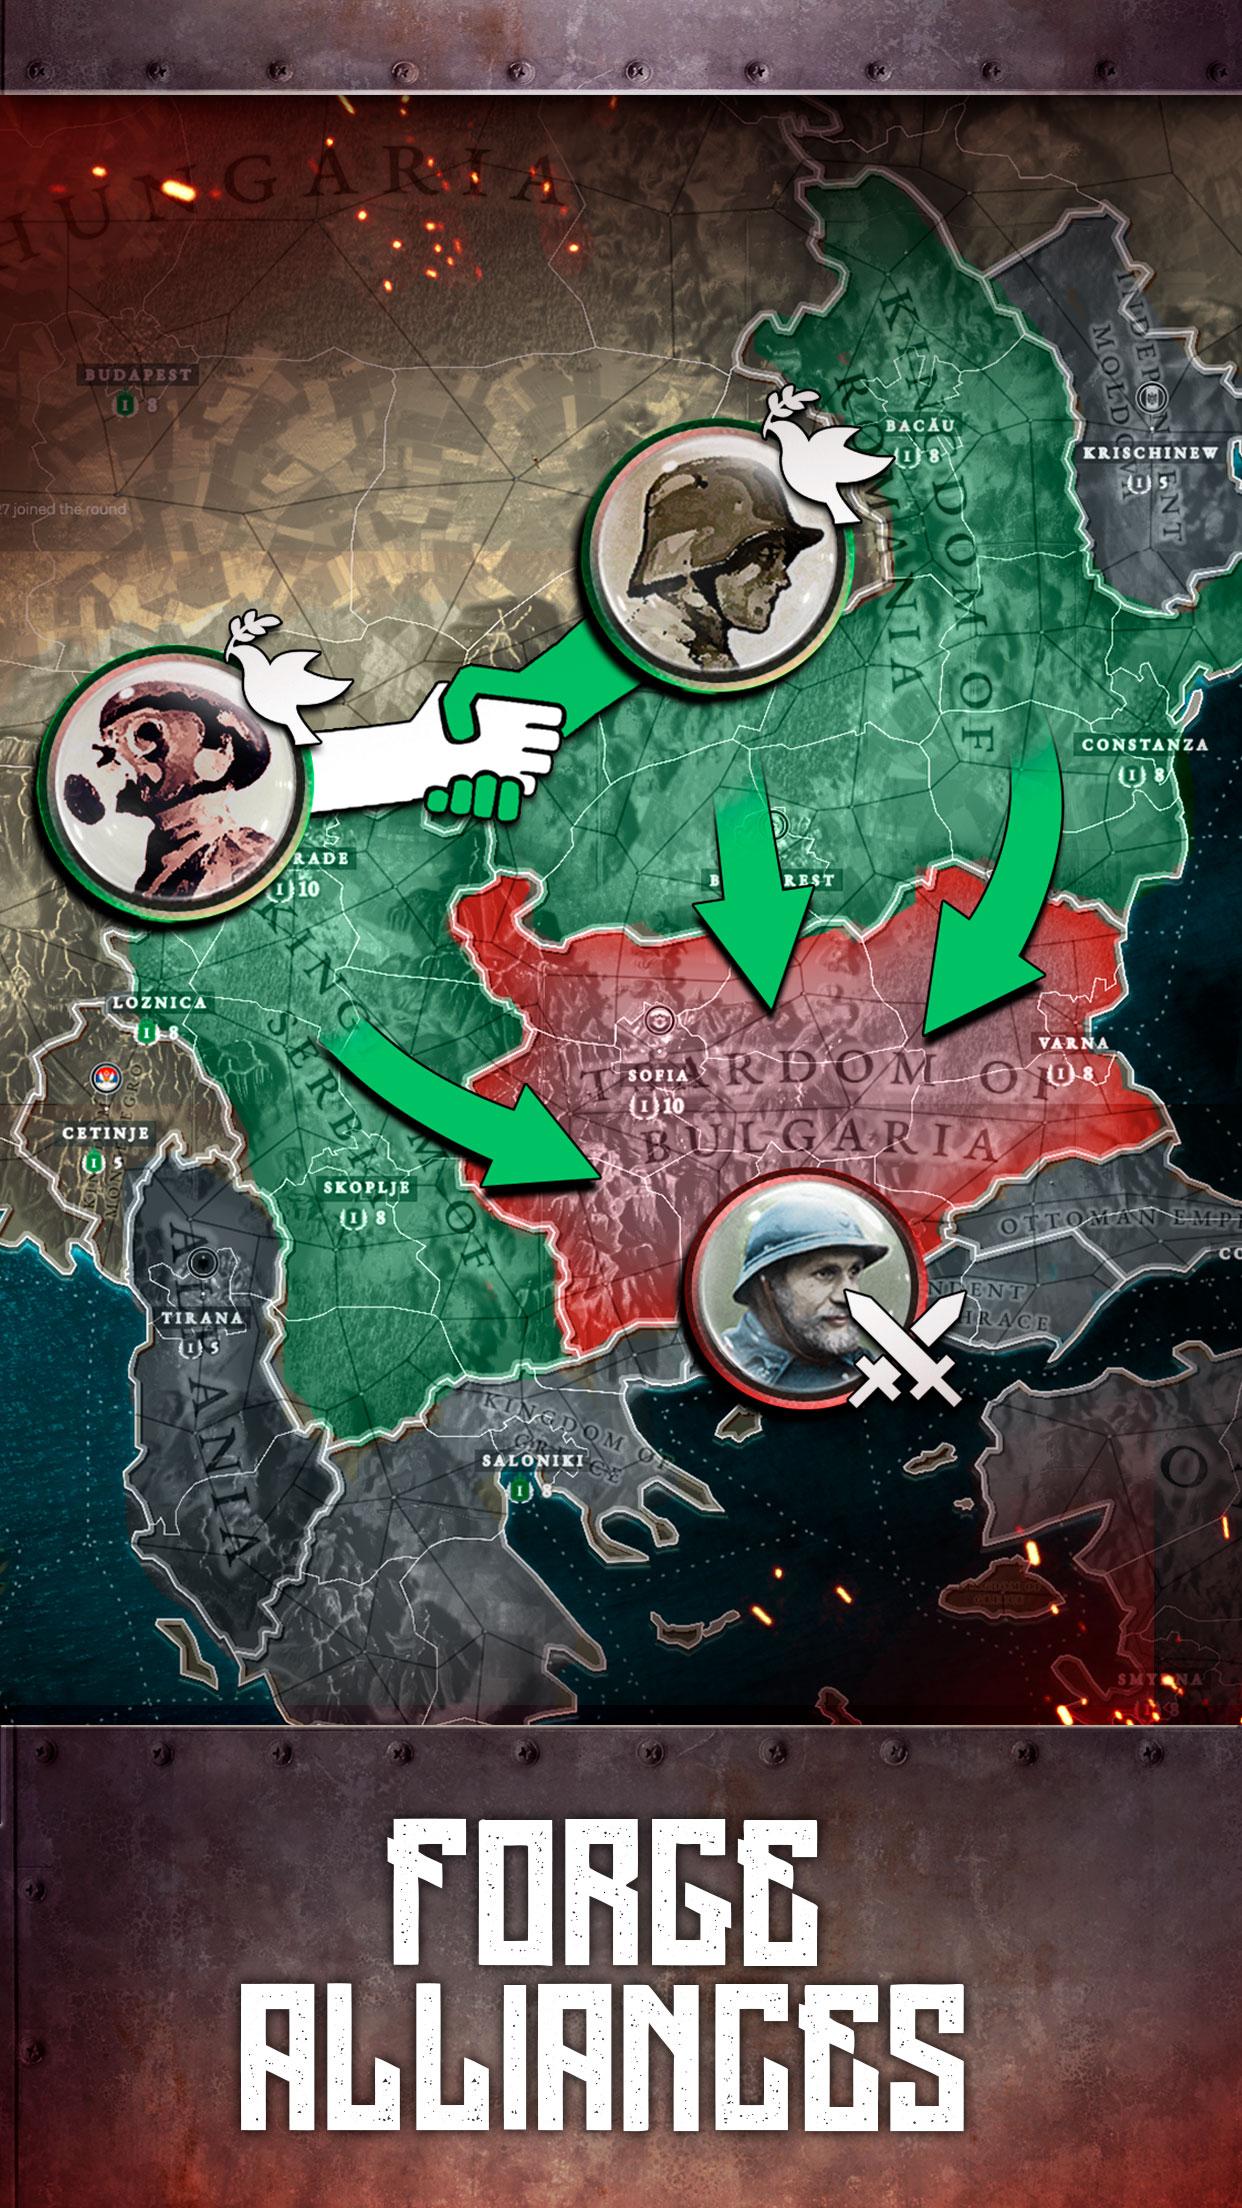 Iron Order 1919 - Altered History Strategy Game 0.114 Screenshot 4